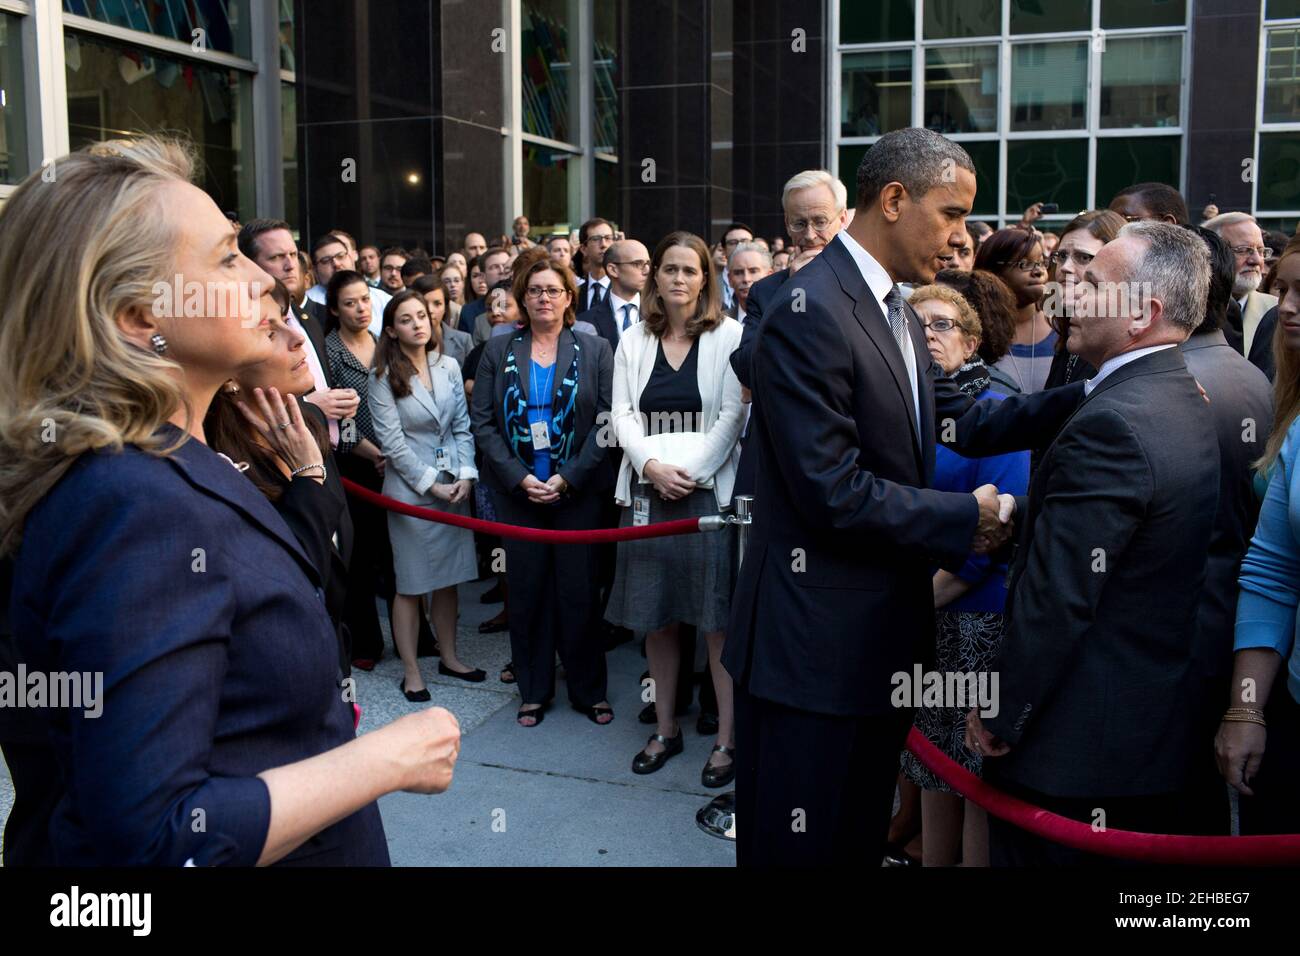 President Barack Obama greets State Department employees after speaking to them in a courtyard at the State Department in Washington, D.C., Sept. 12, 2012. Secretary of State Hillary Rodham Clinton stands at left. The President made the visit after Chris Stevens, U.S. Ambassador to Libya, and three others were killed at the consulate in Benghazi, Libya, yesterday. Stock Photo